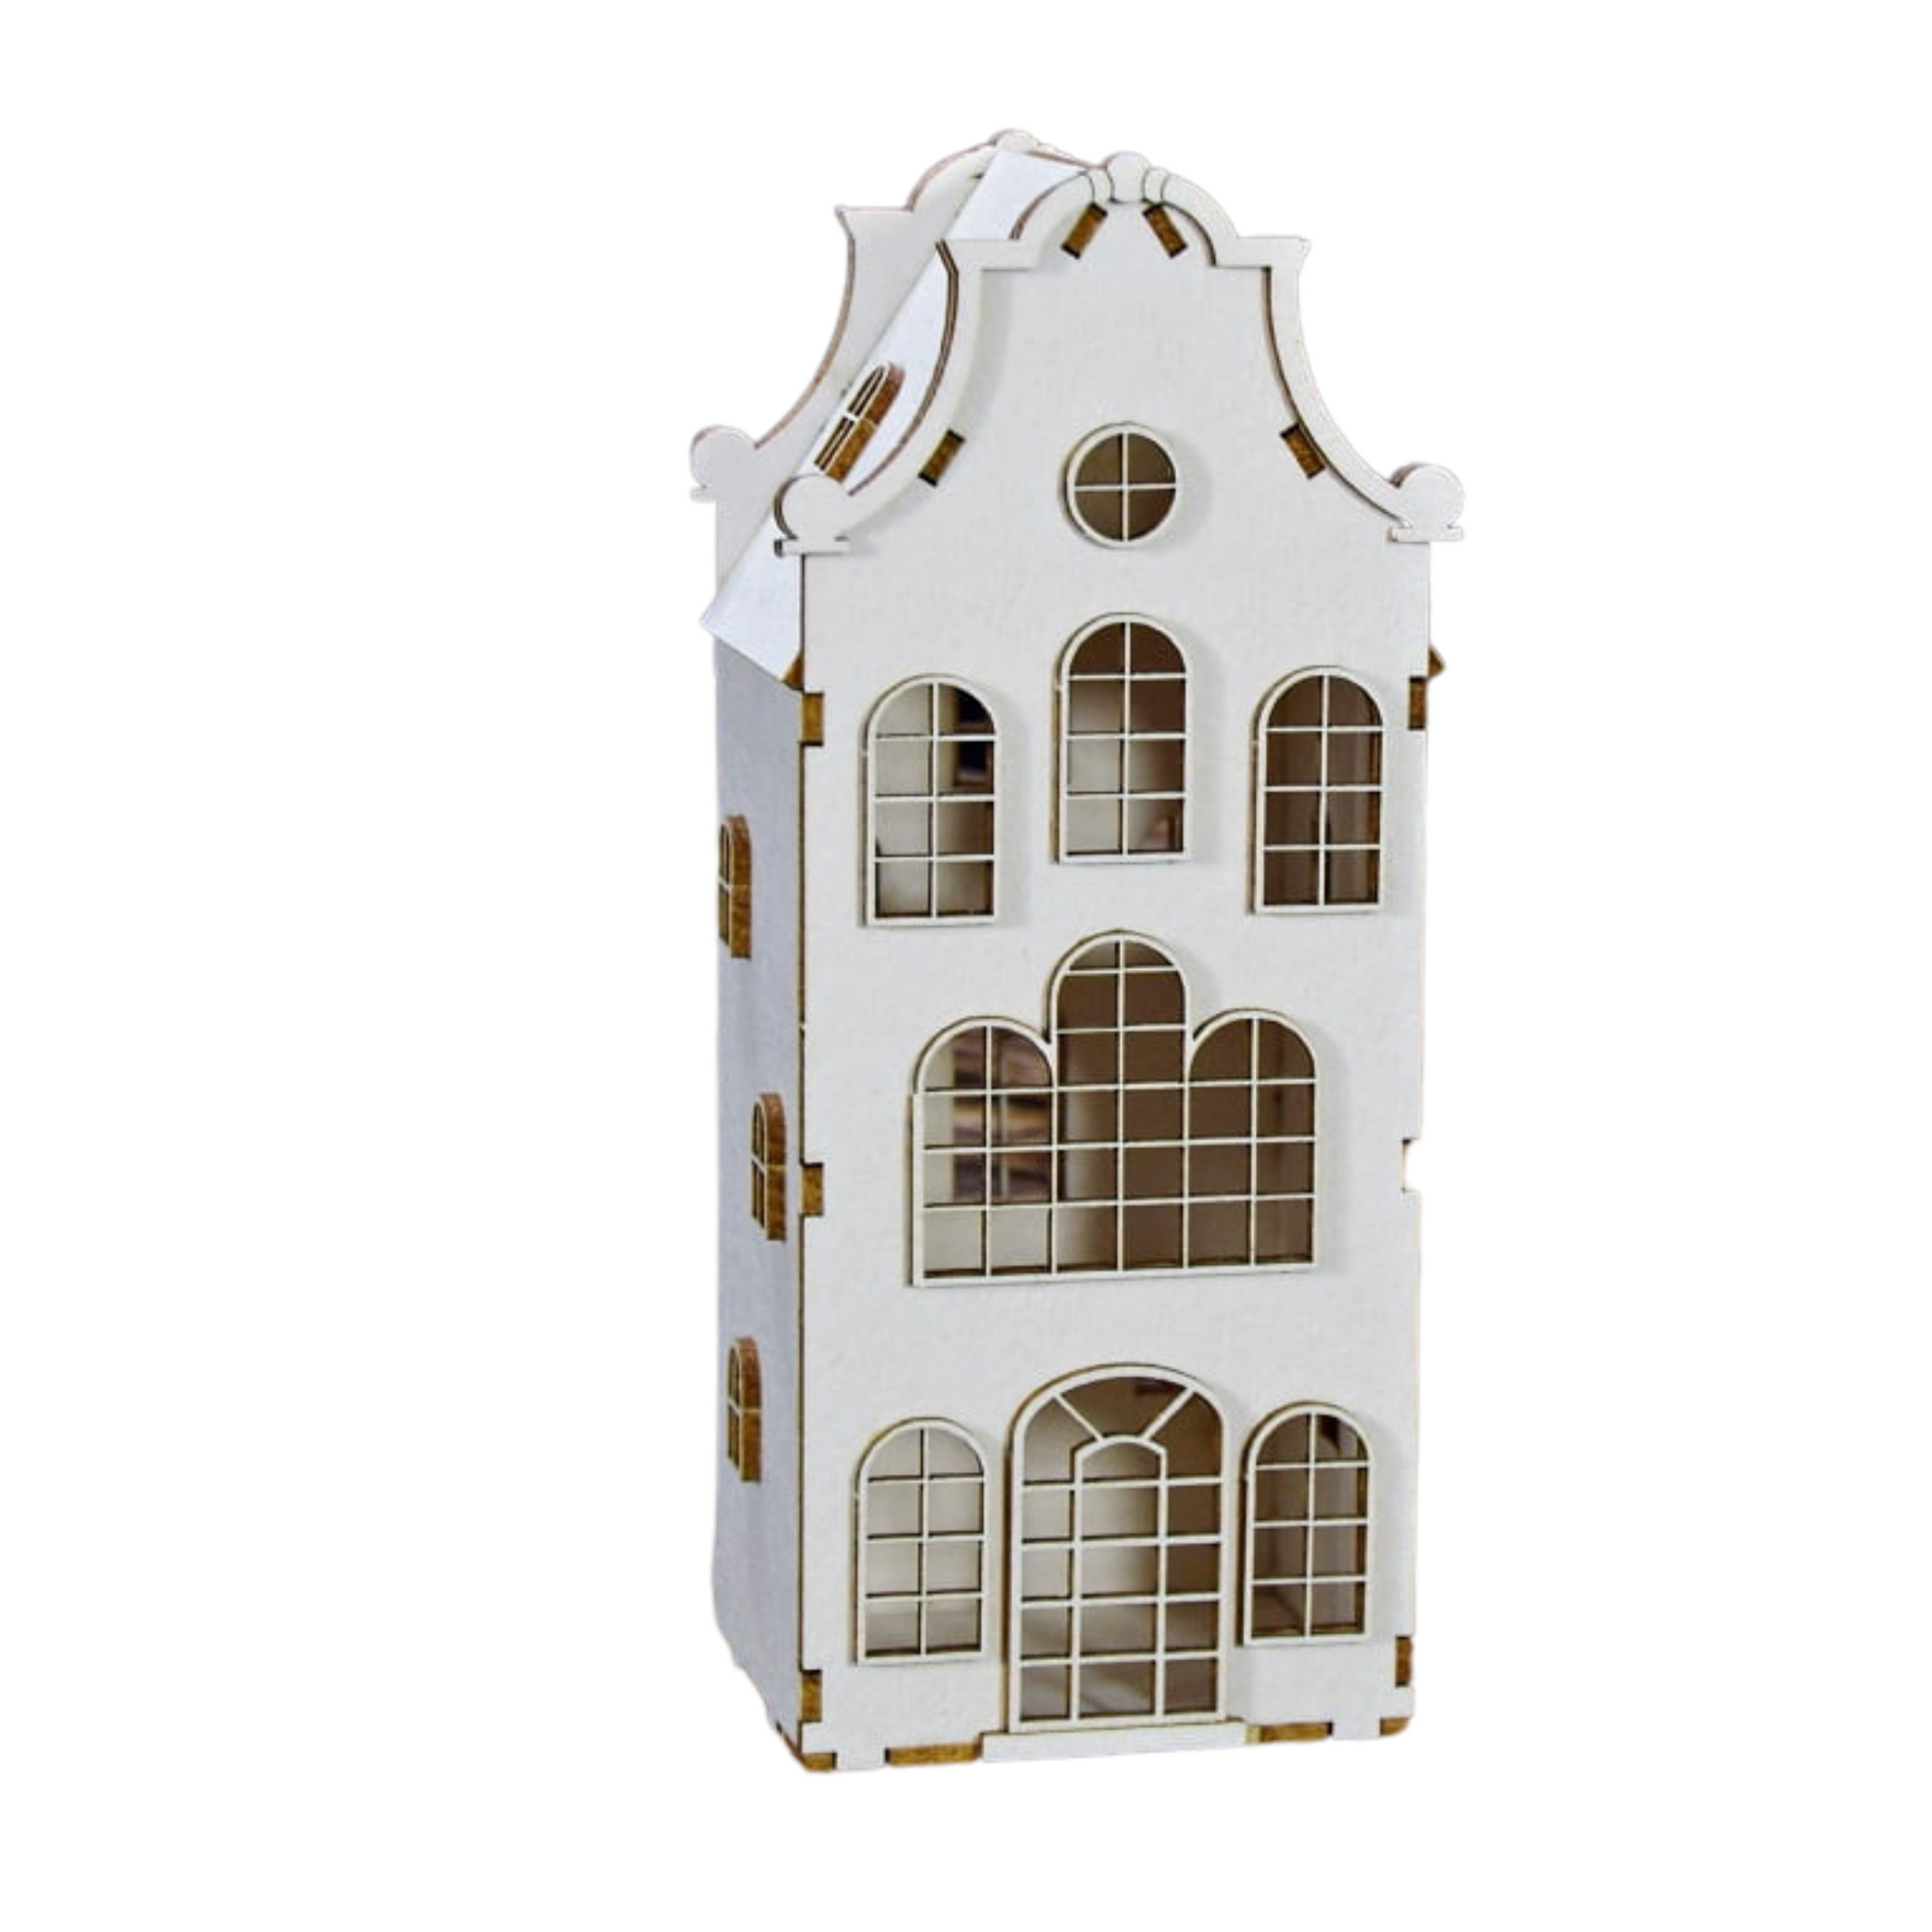 Tenement House #2 from the LIttle Town Collection by Sniparat available at Milton's Daughter